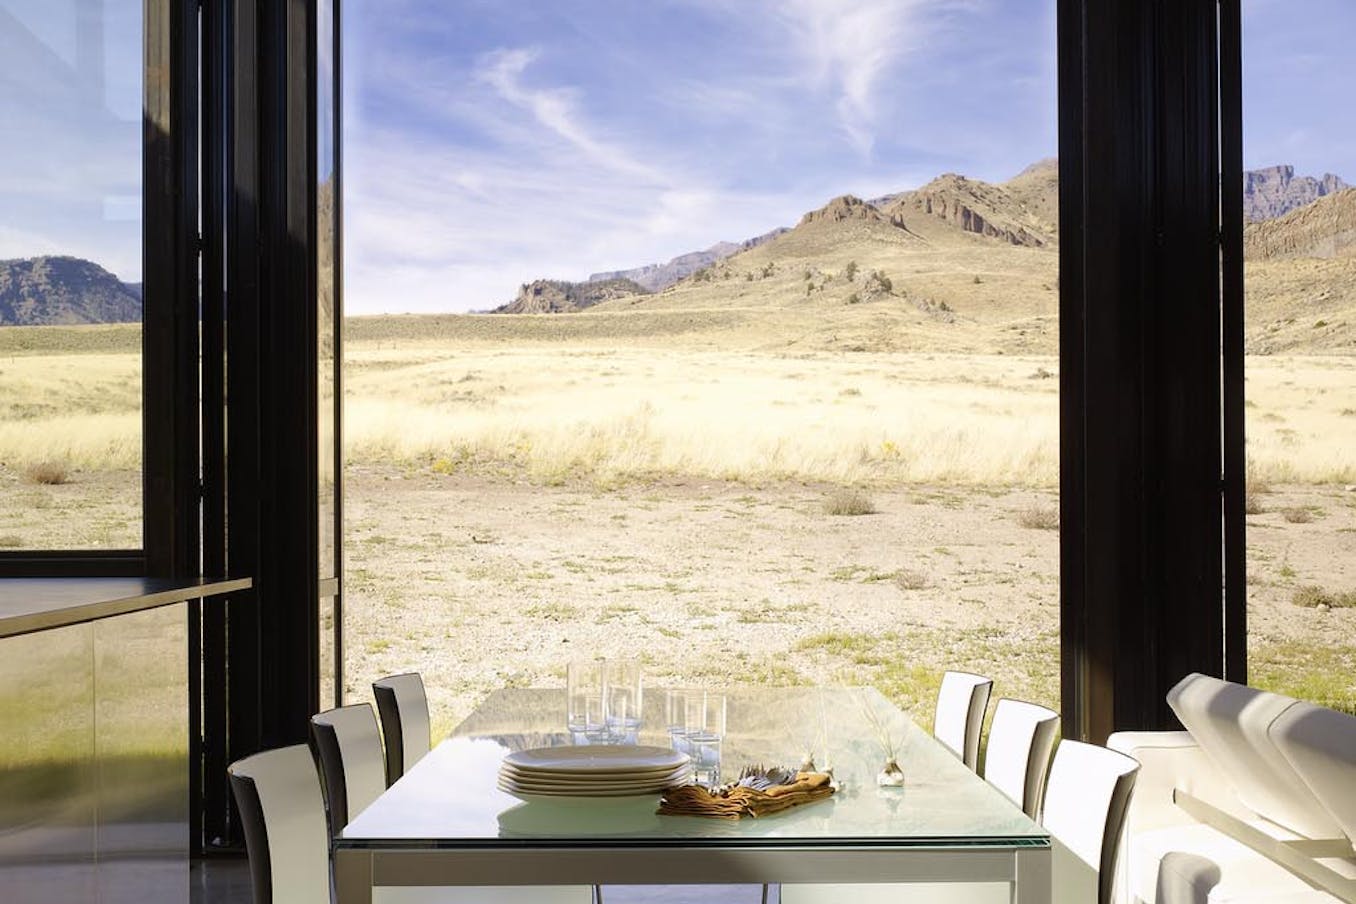 A table with plates and glasses on it in front of a desert landscape - SL70 folding